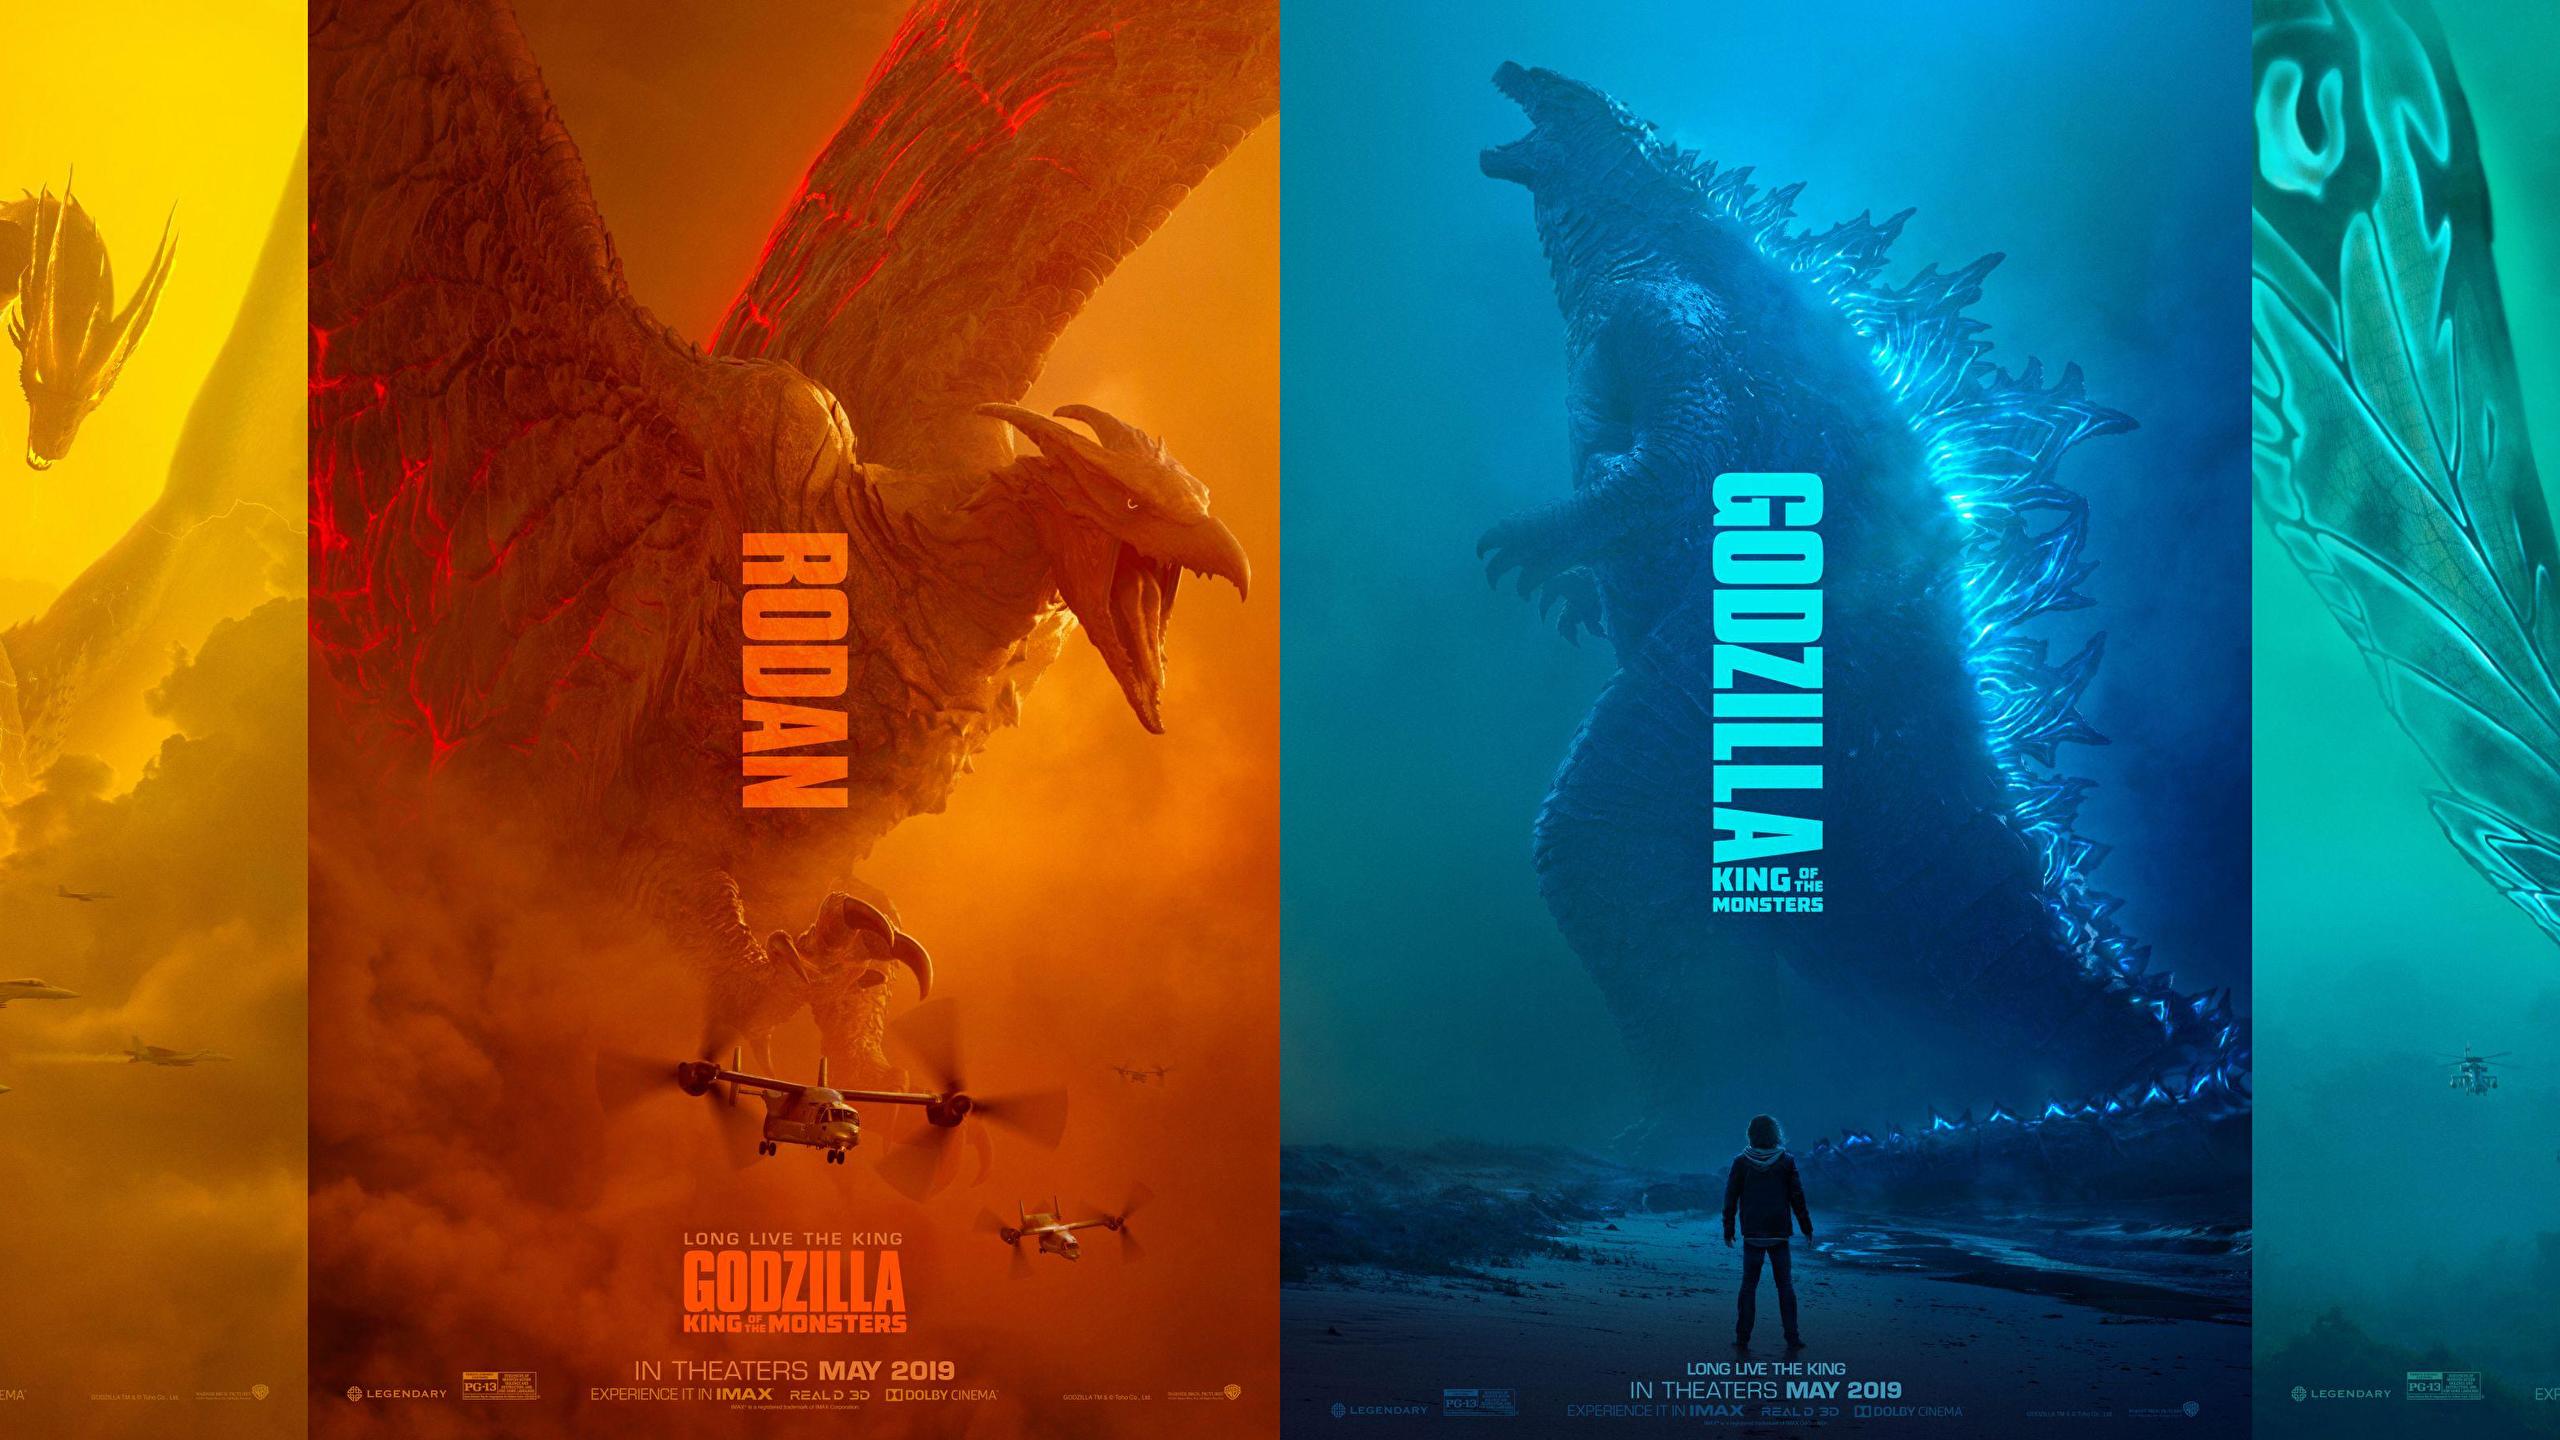 I made an Ultra Wide wallpaper from the Godzilla posters wallpapers